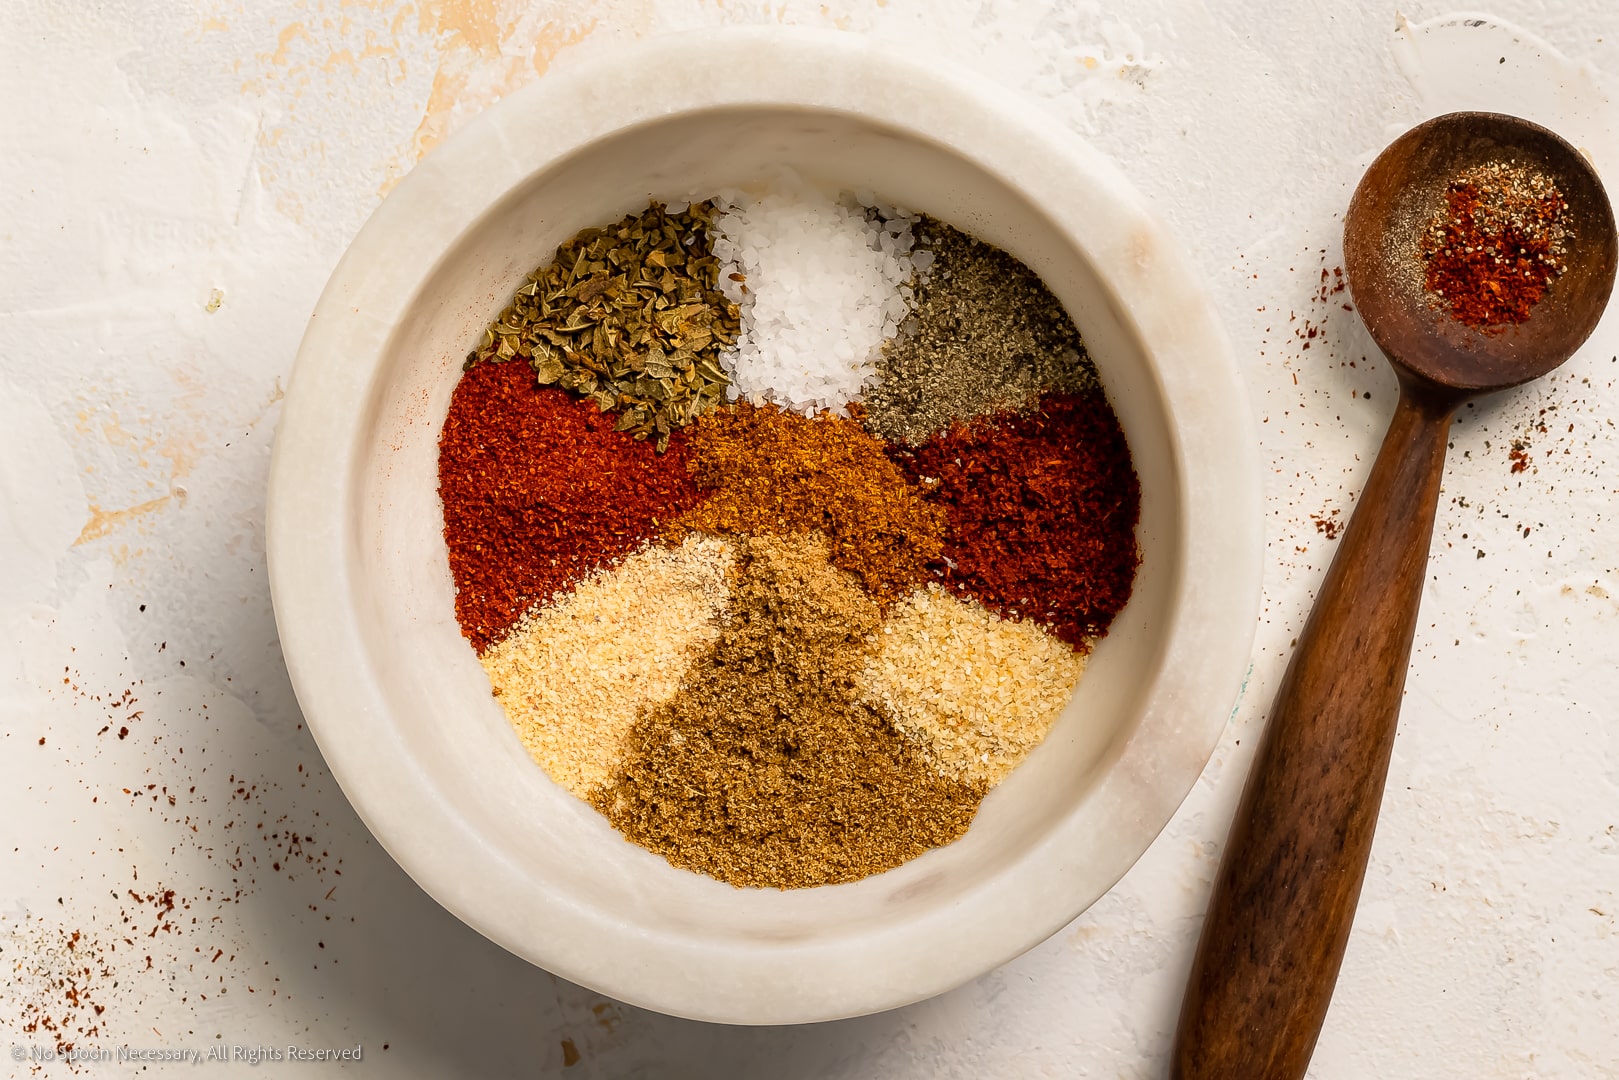 An Encyclopedia of Spices, Including Everything from Cinnamon to Turmeric